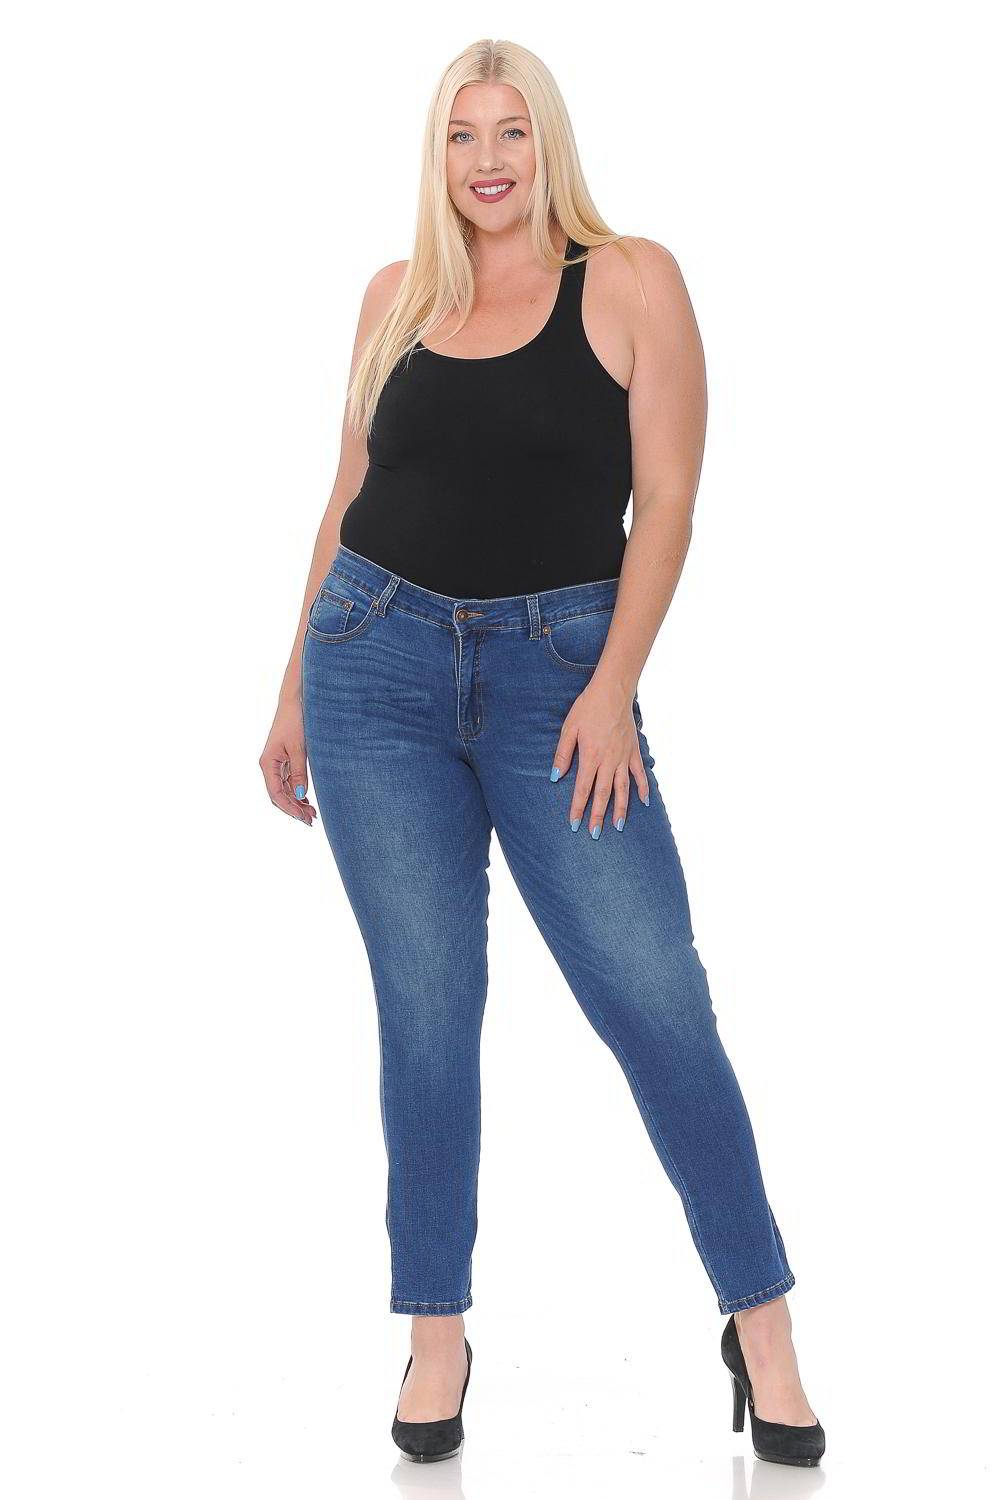 Size 14 in jeans, selecting the right size of jeans can be a challenging task, especially when considering factors like fit